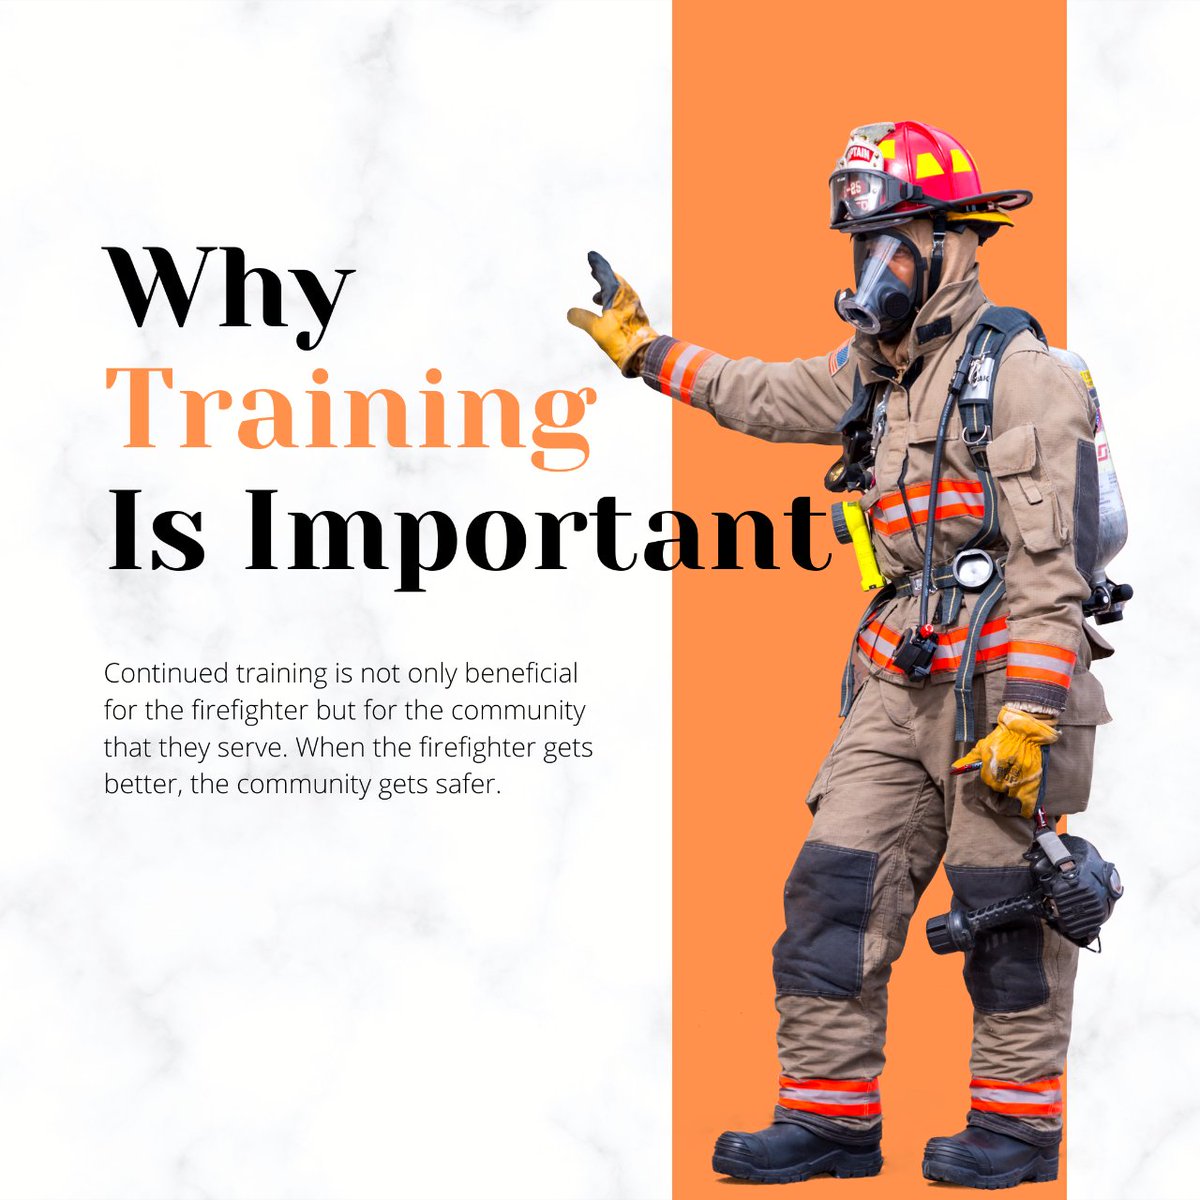 Check out our new post on LinkedIn about the importance of firefighters furthering their training! mtr.bio/csffa

#firefightersafety #firerescue #traininganddevelopment